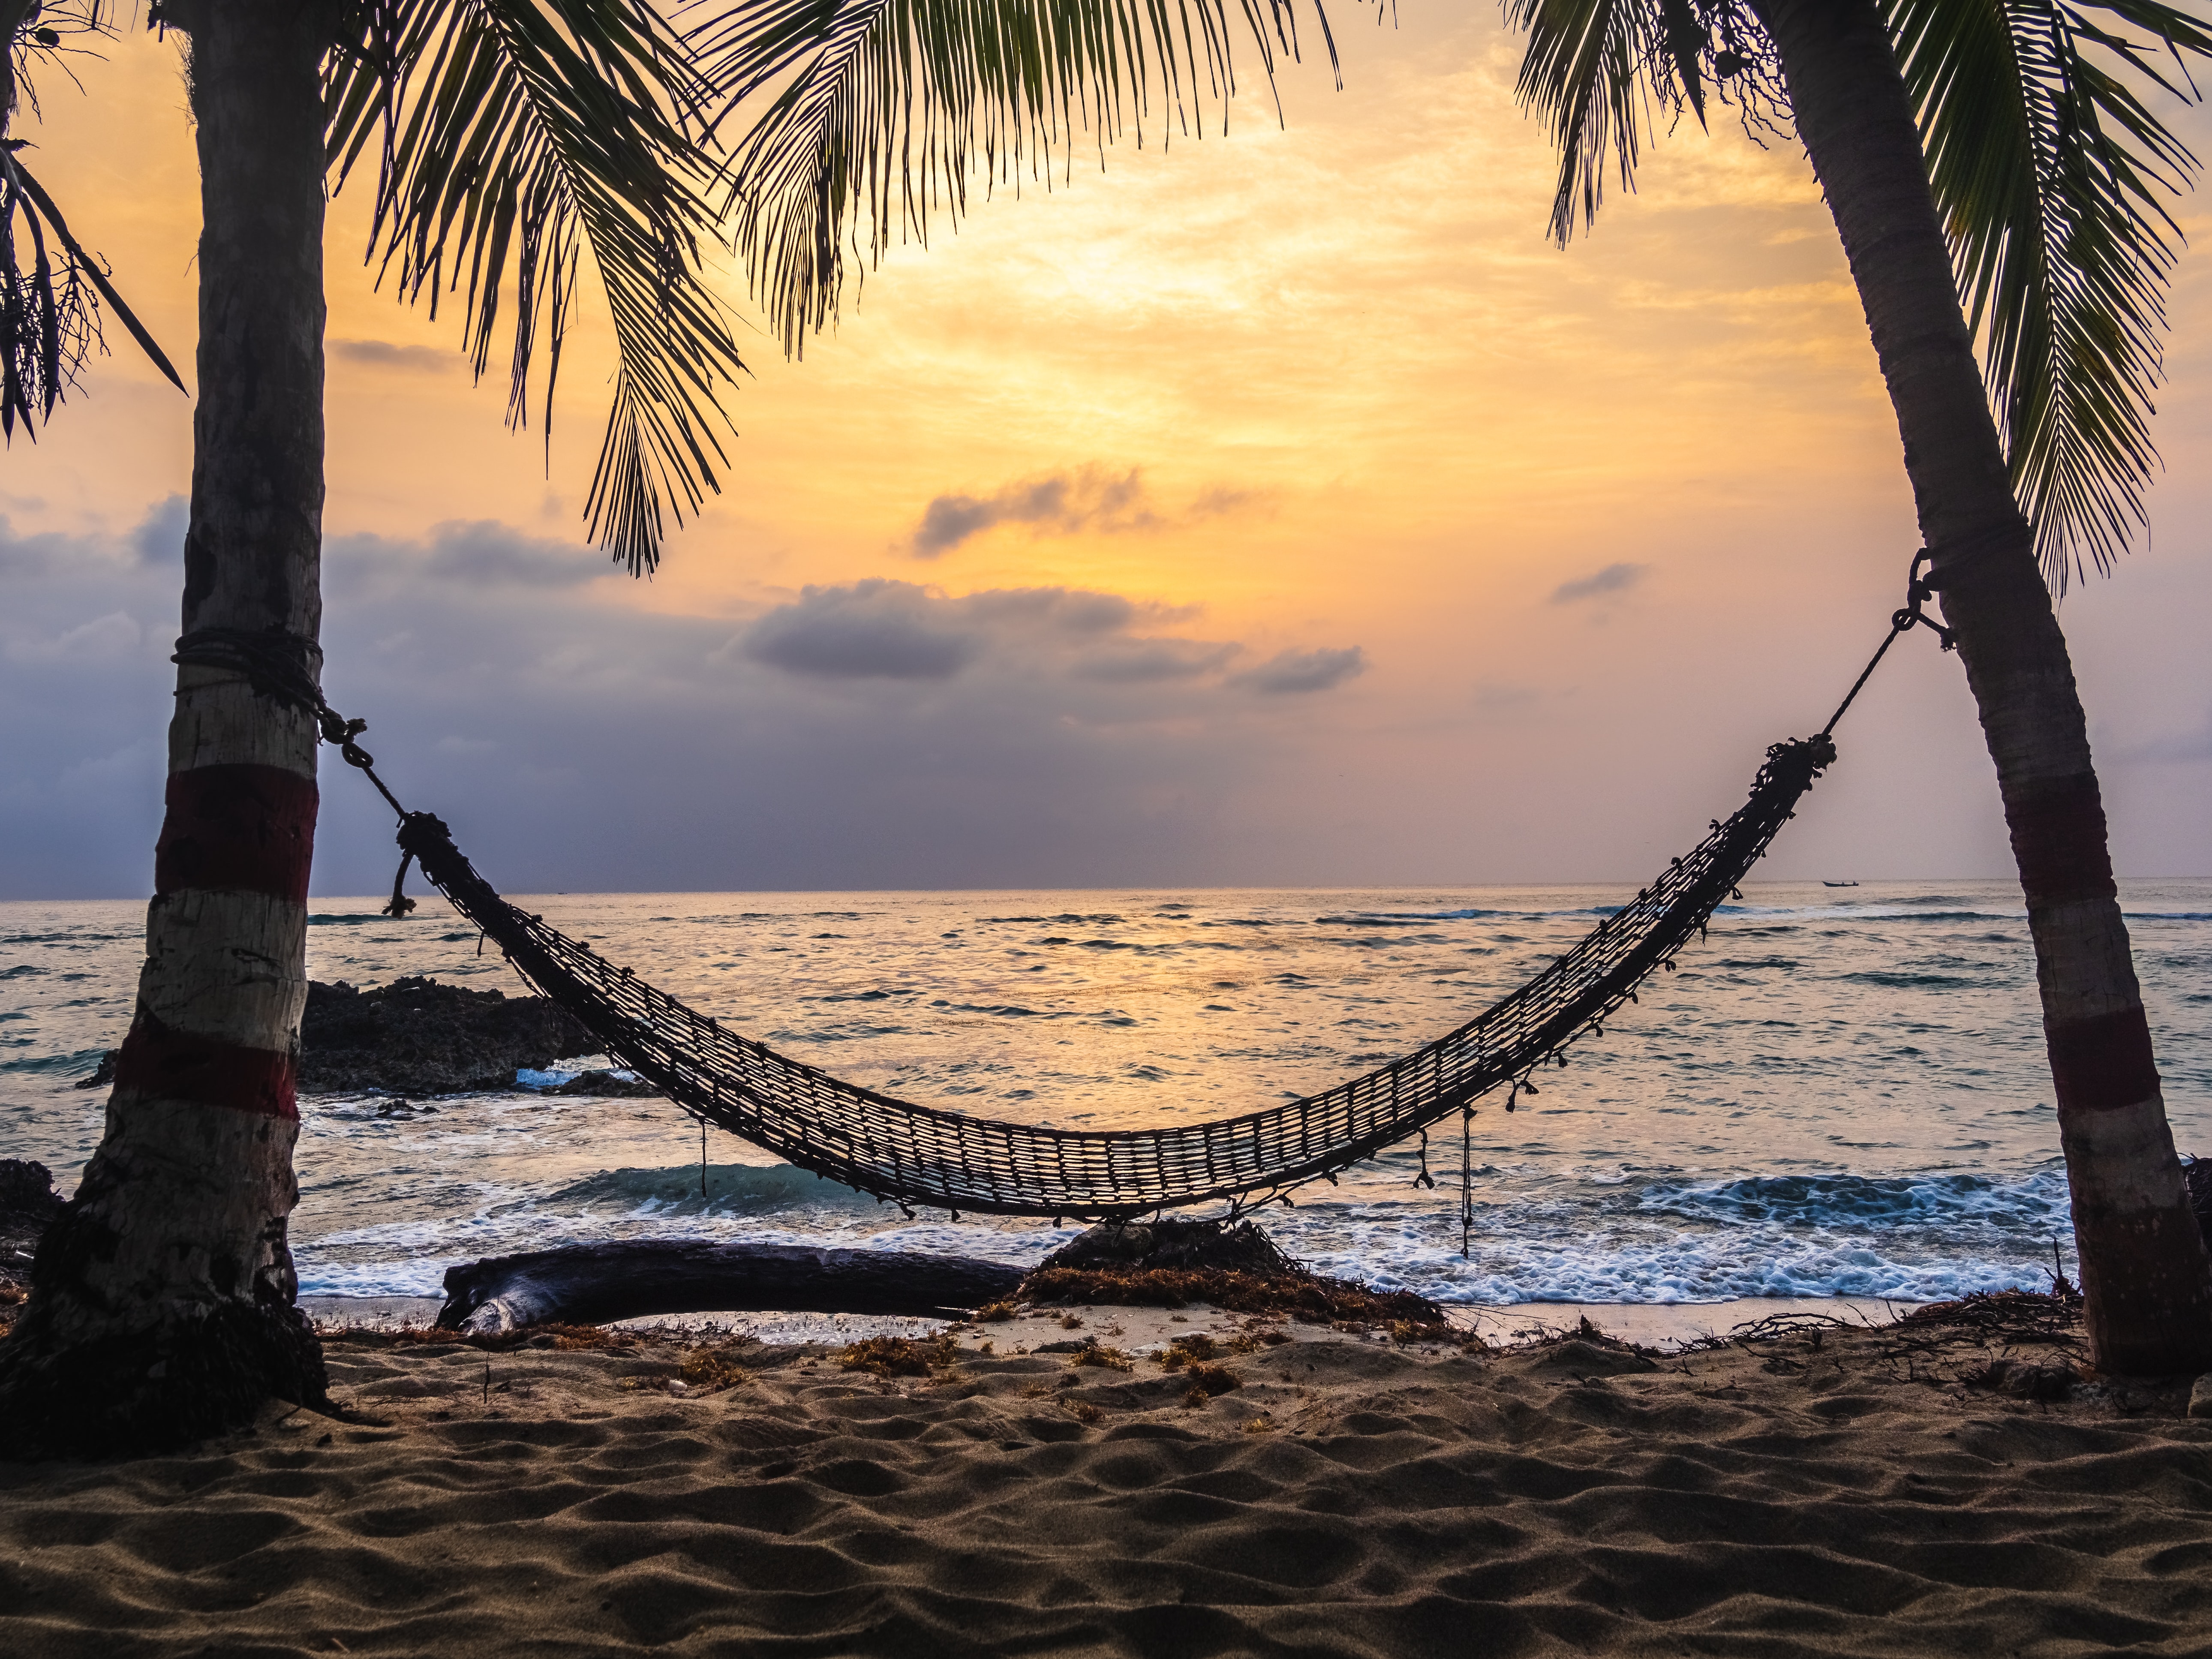 A hammock tied between two trees by the beach.